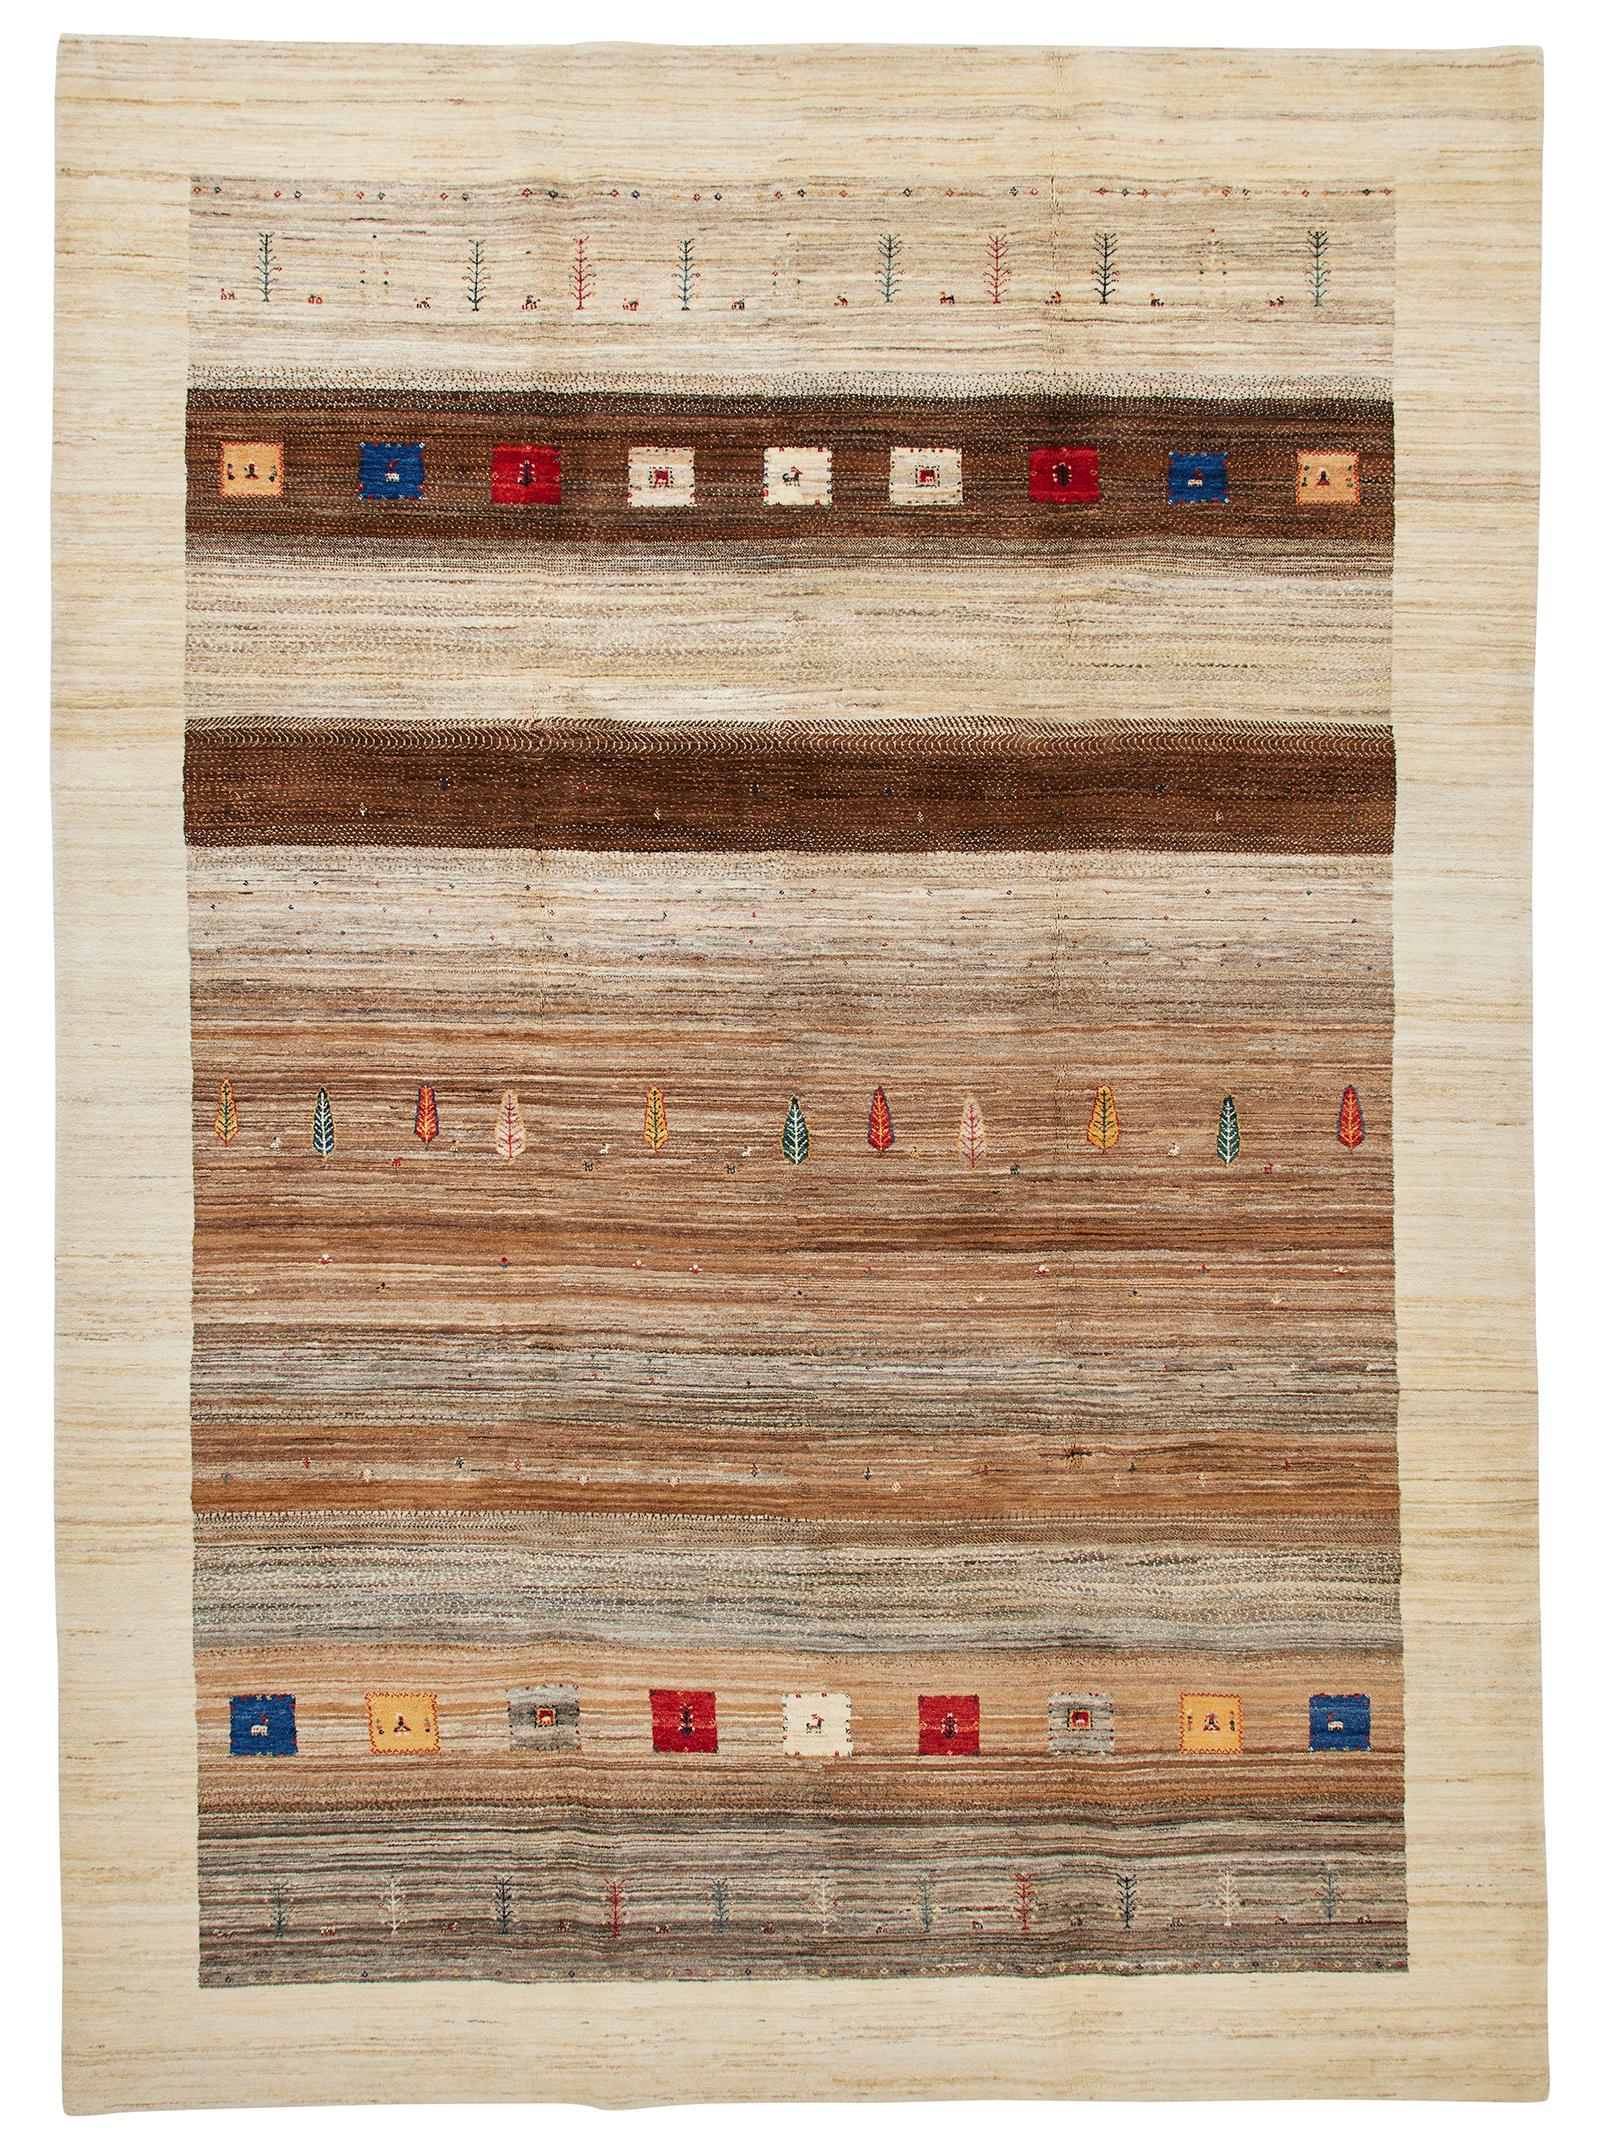 This gabbeh is a hand knotted one-of-a-kind rug. It is woven of 100% Persian wool, in a selection of natural tones with pops of color. This carpet measures 8' 1